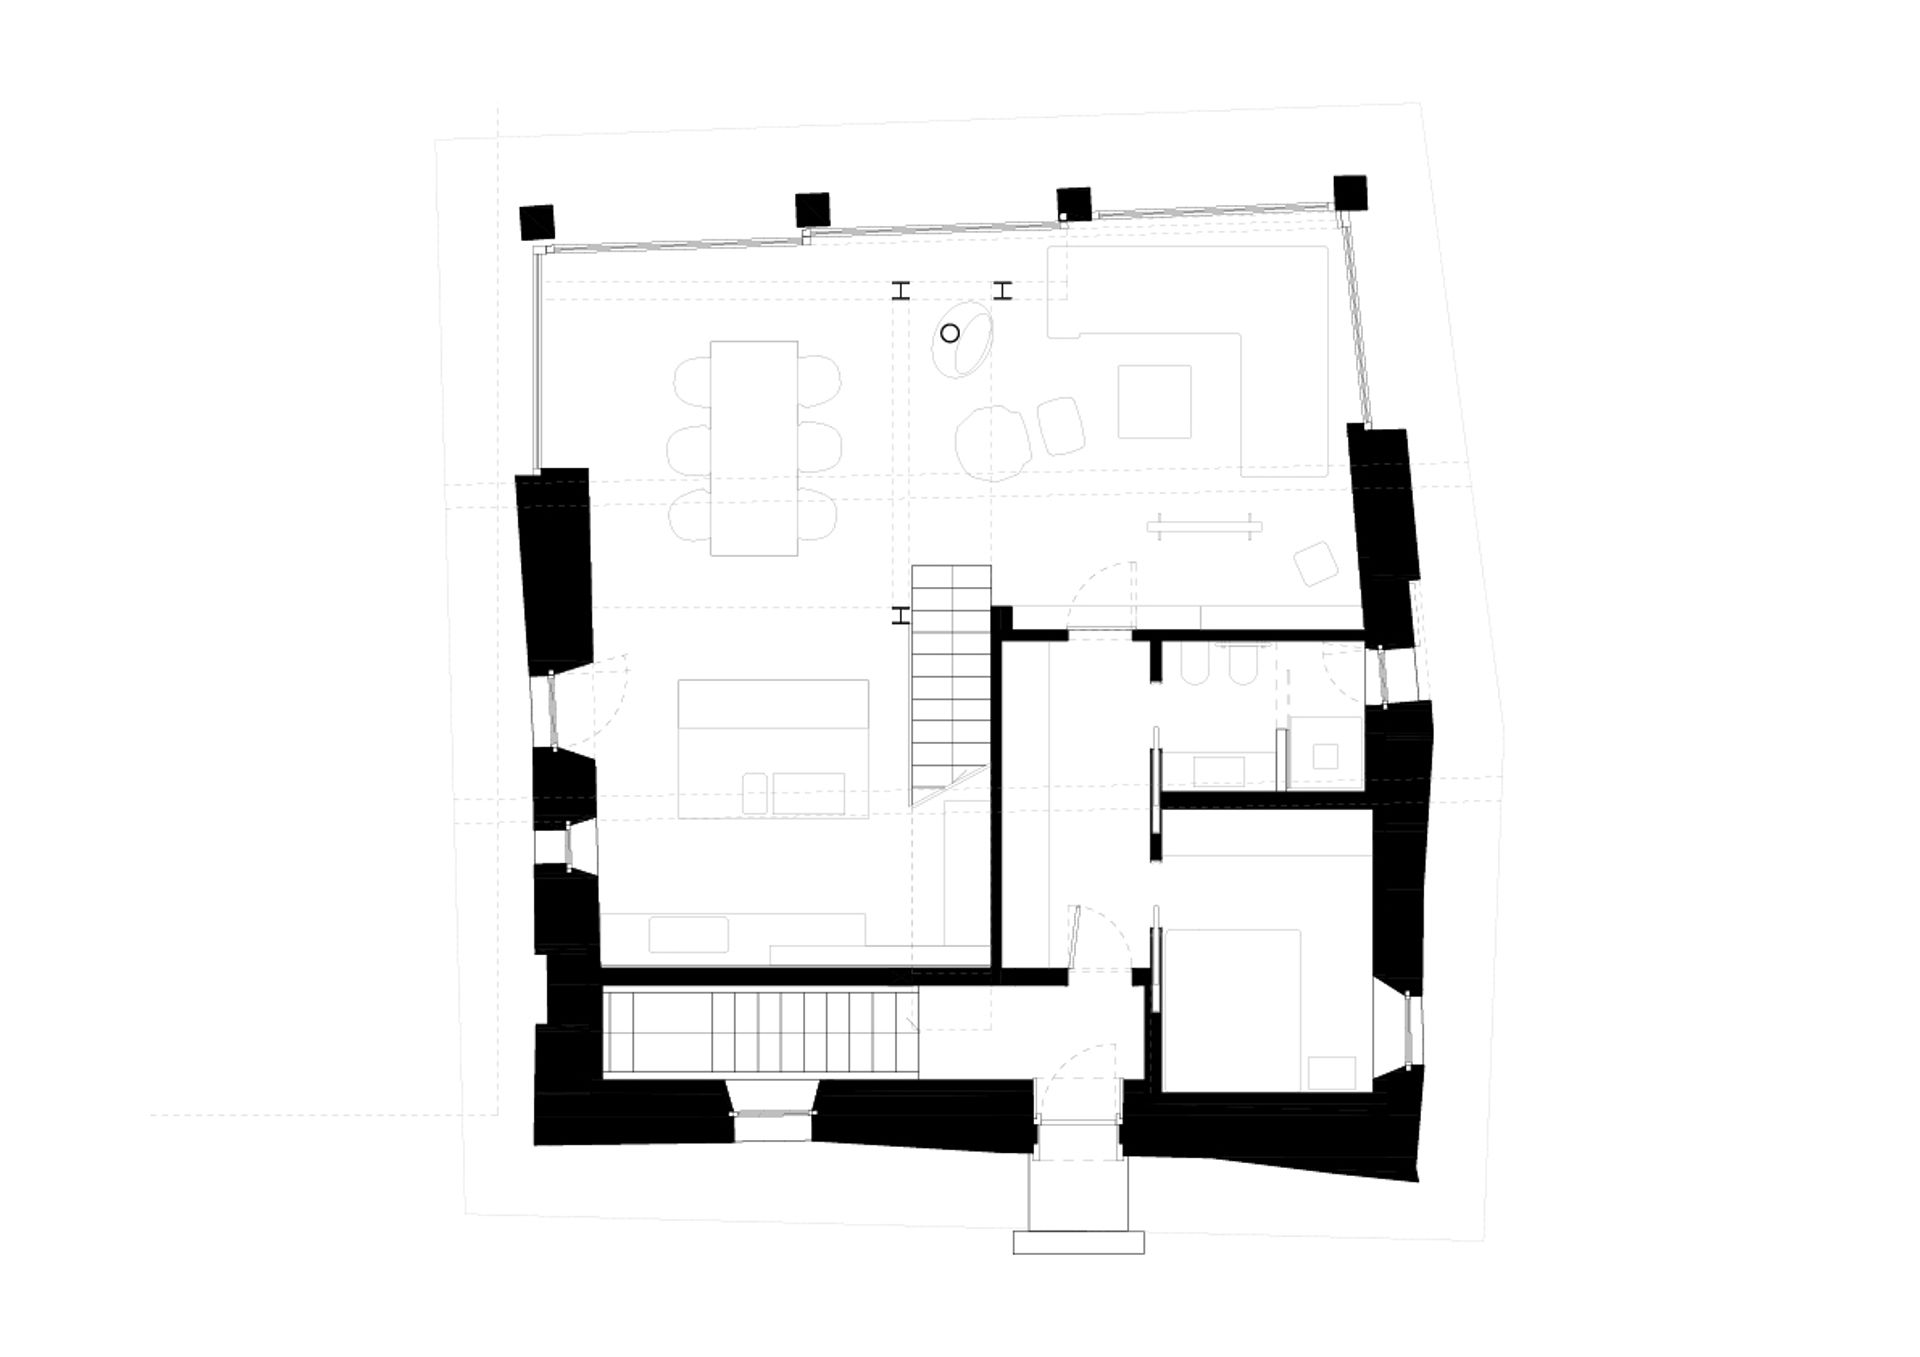 Farmhouse renovation project, recovery old house in the countryside of Bergamo. Officina Magisafi architecture design - ground floor plan